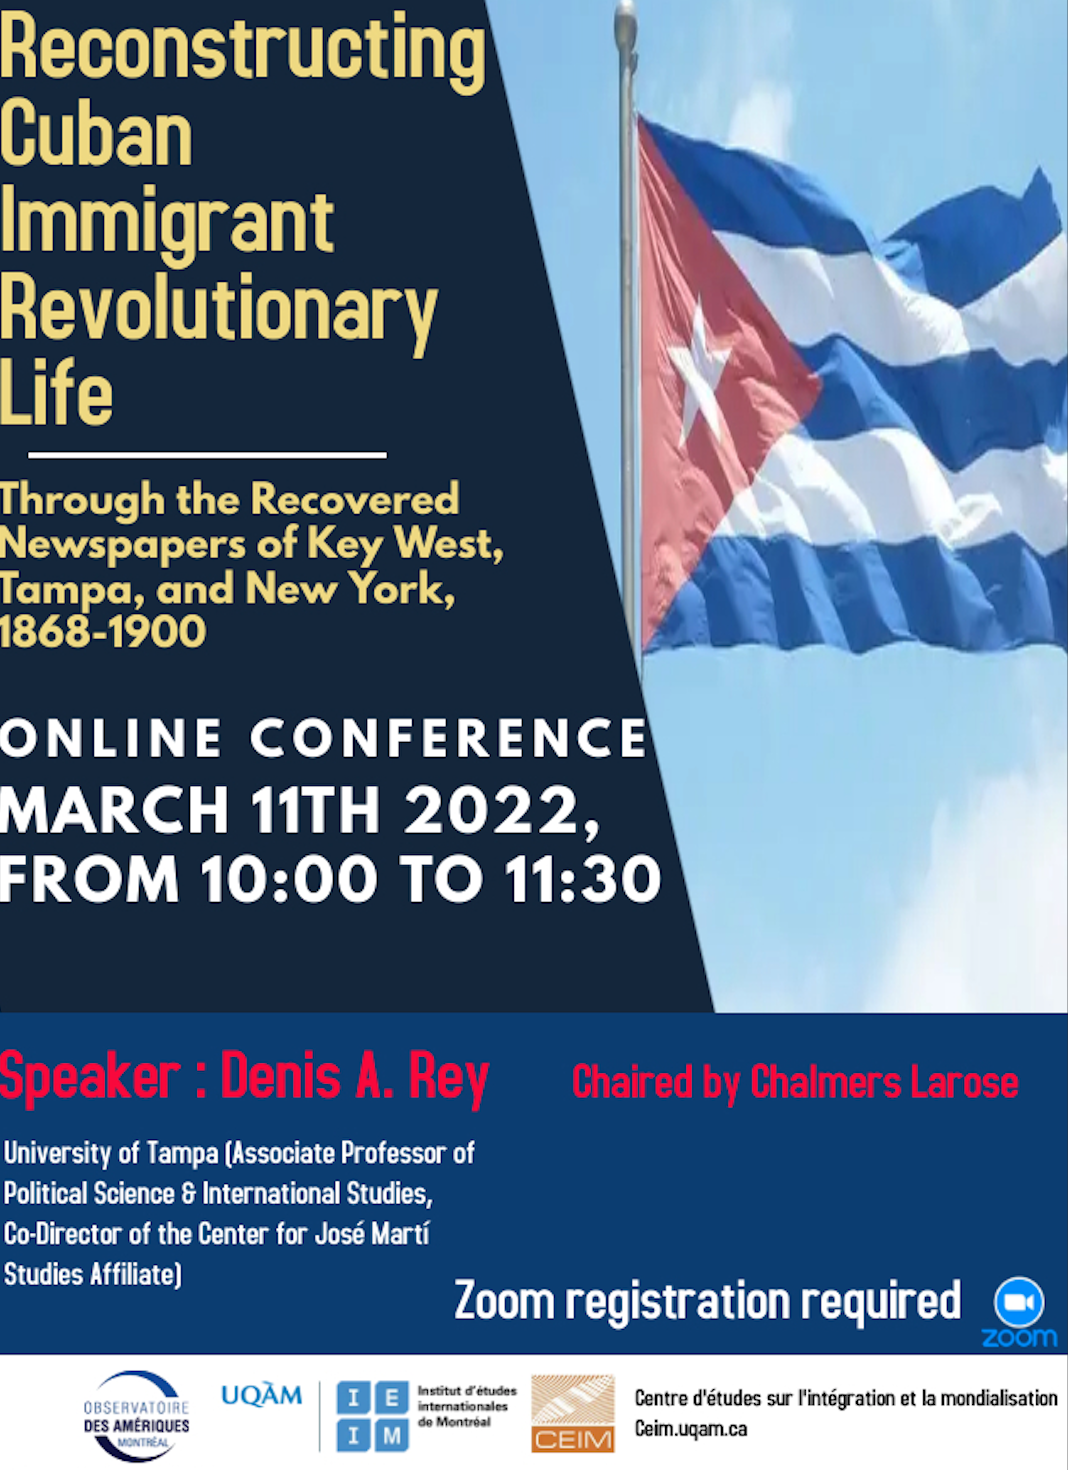 Conférence : Reconstructing Cuban Immigrant Revolutionary Life through the Recovered Newspapers of Key West, Tampa, and New York, 1868-1900